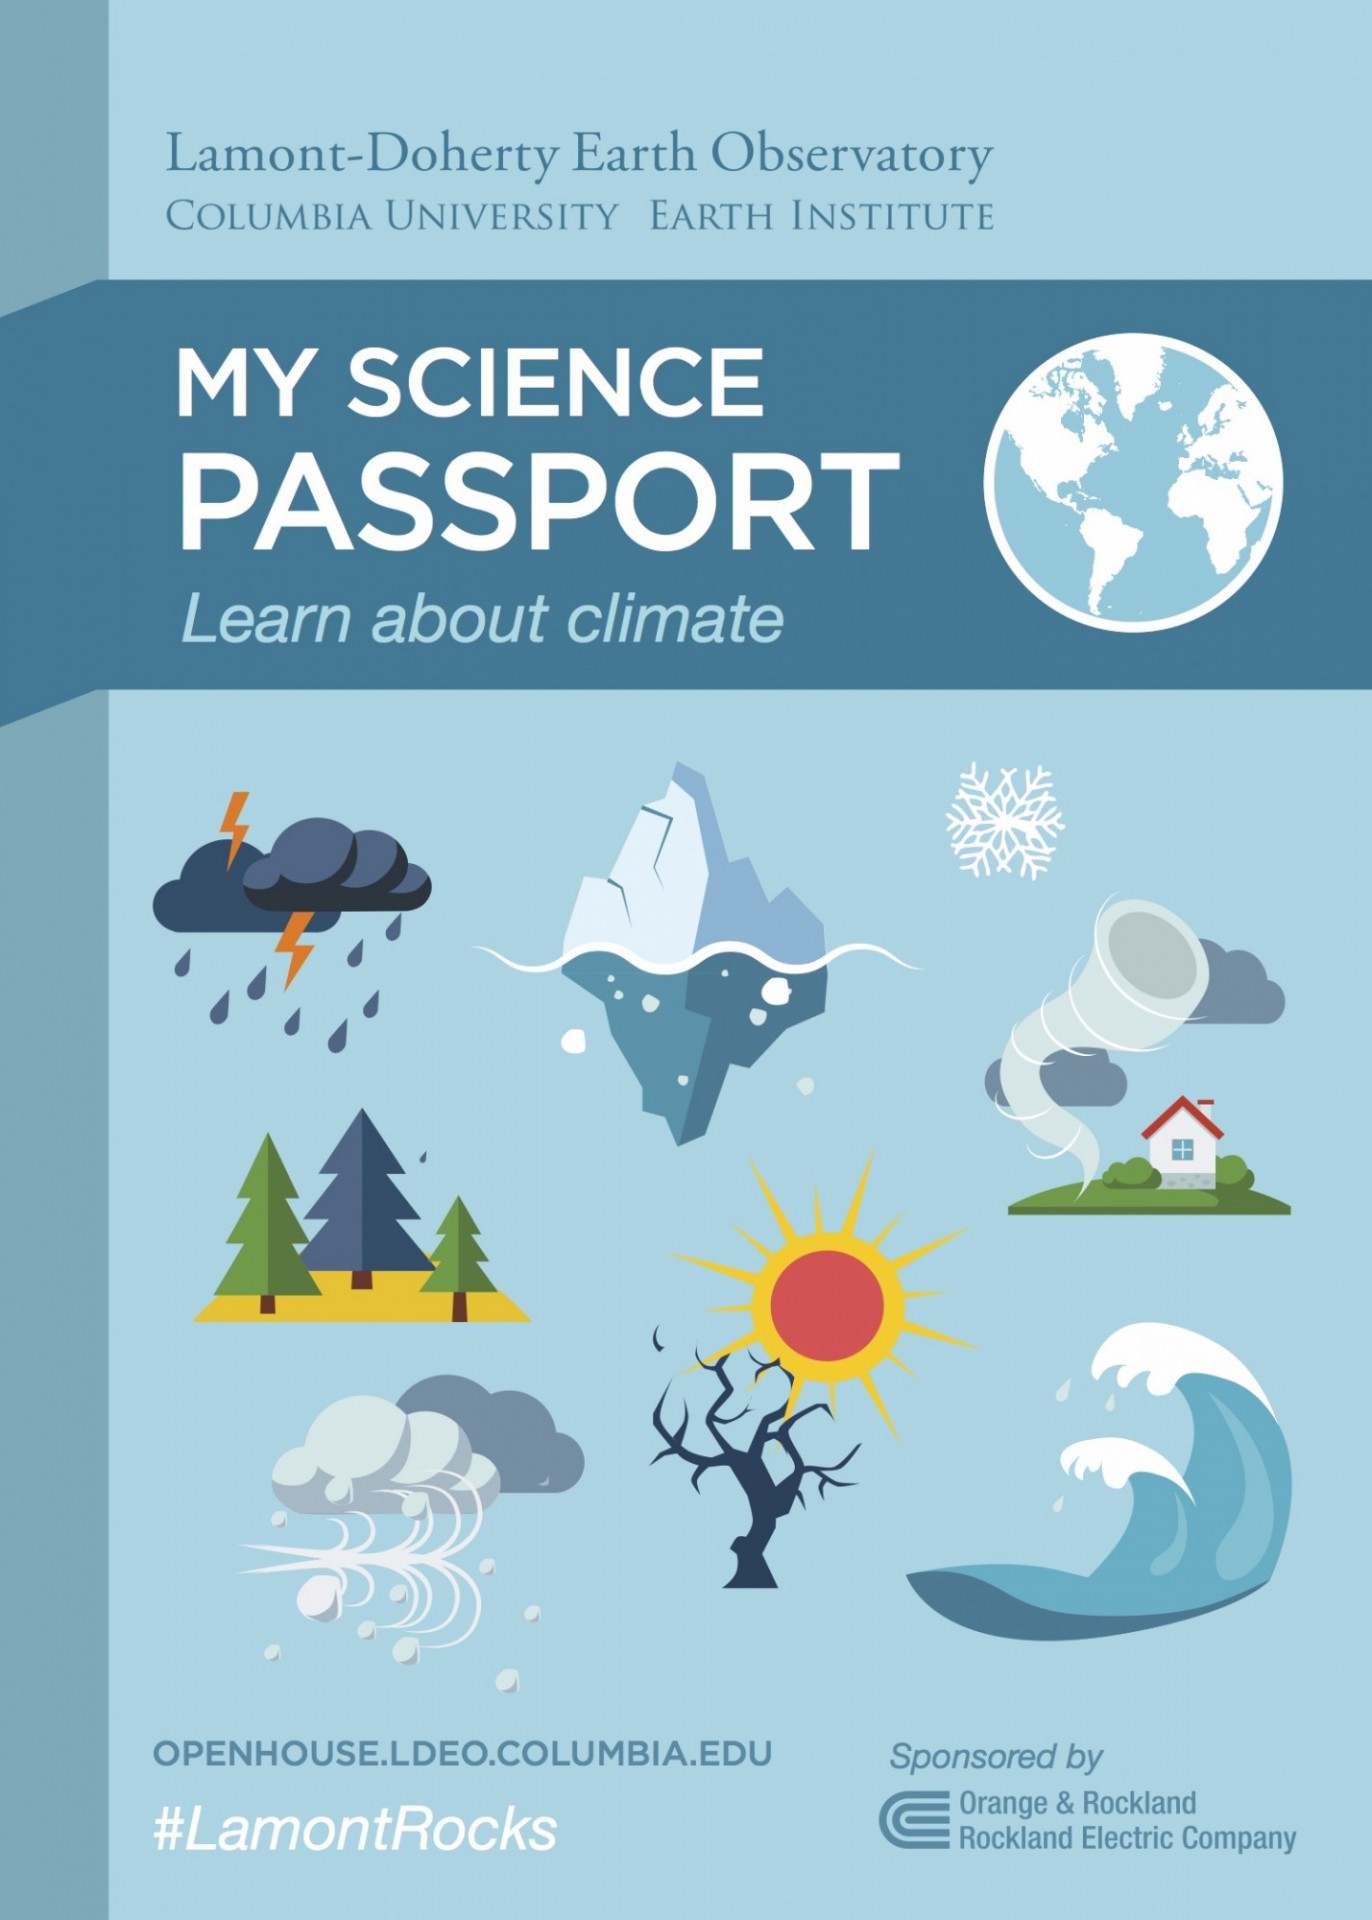 cover image for climate science passport with nature graphics